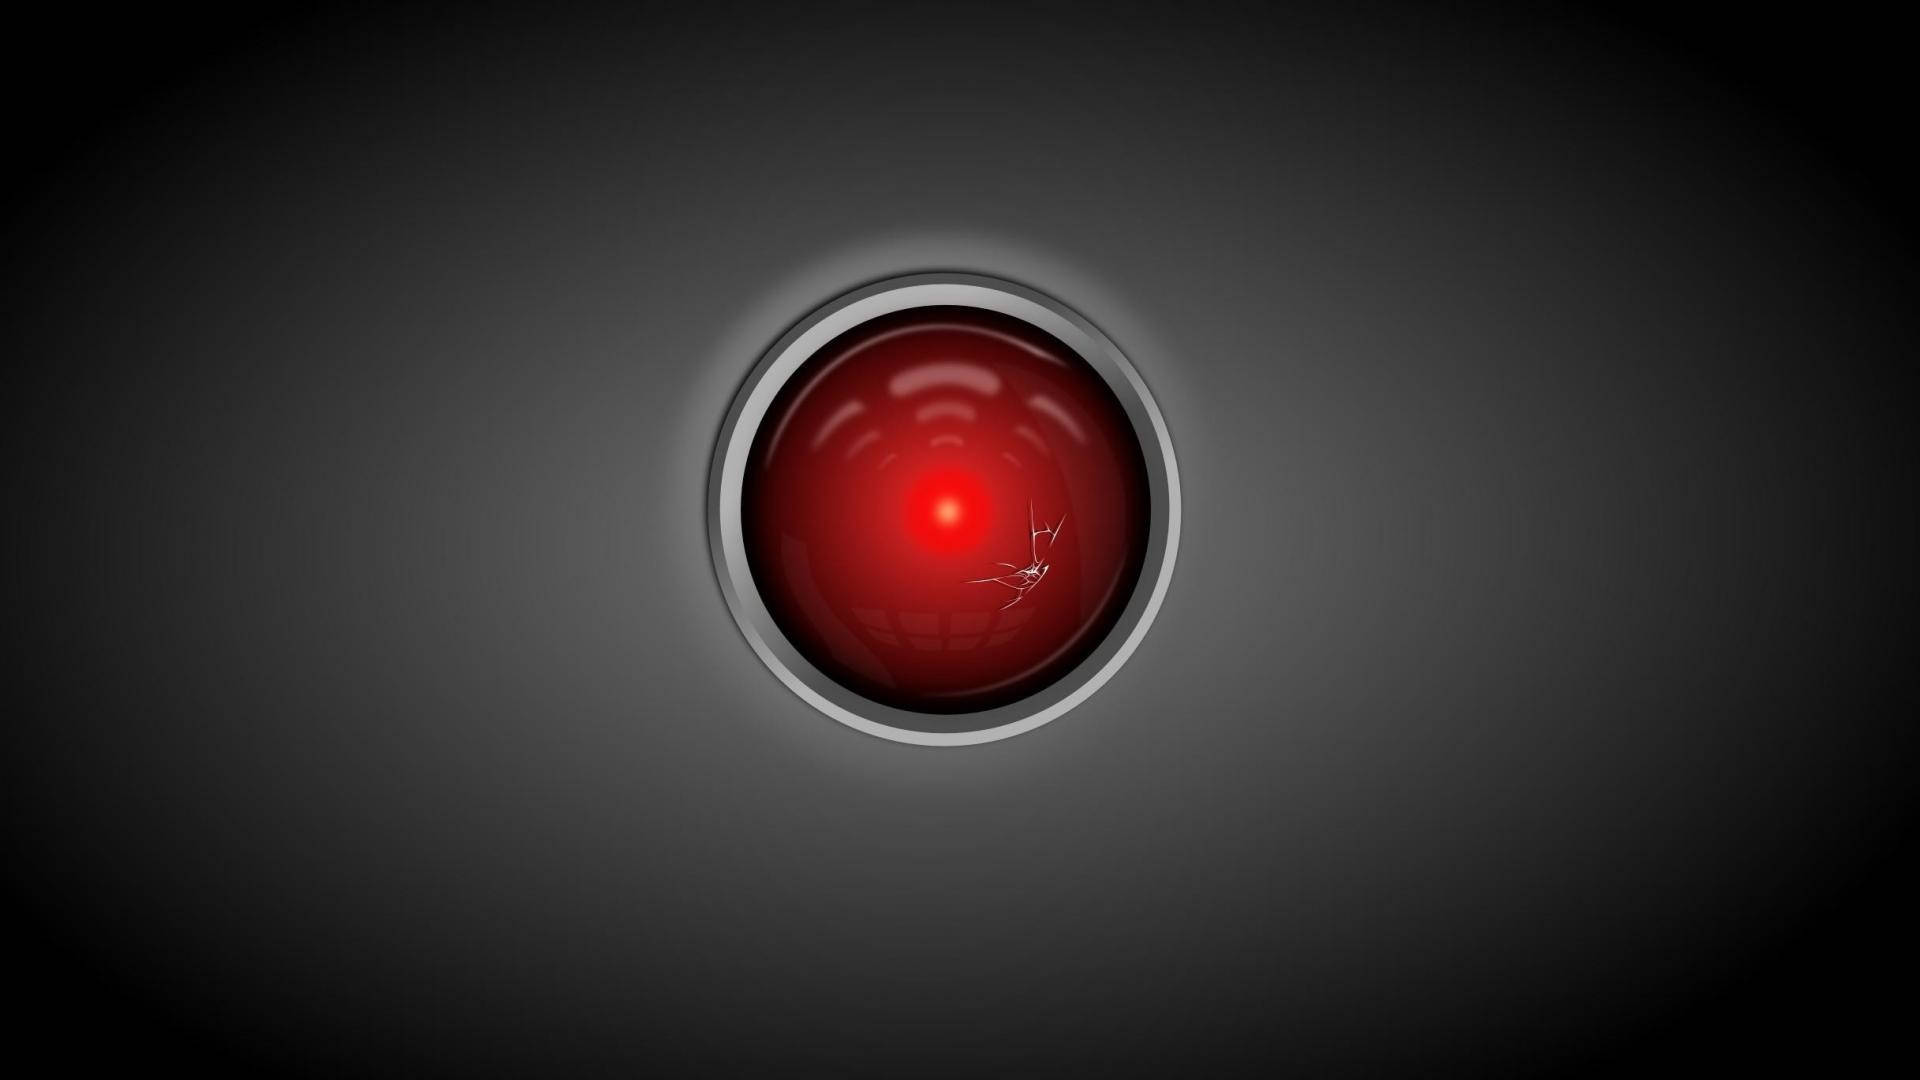 Hal 9000 - A Sentient Artificial Intelligence That Is Both Malevolent And Benevolent Background